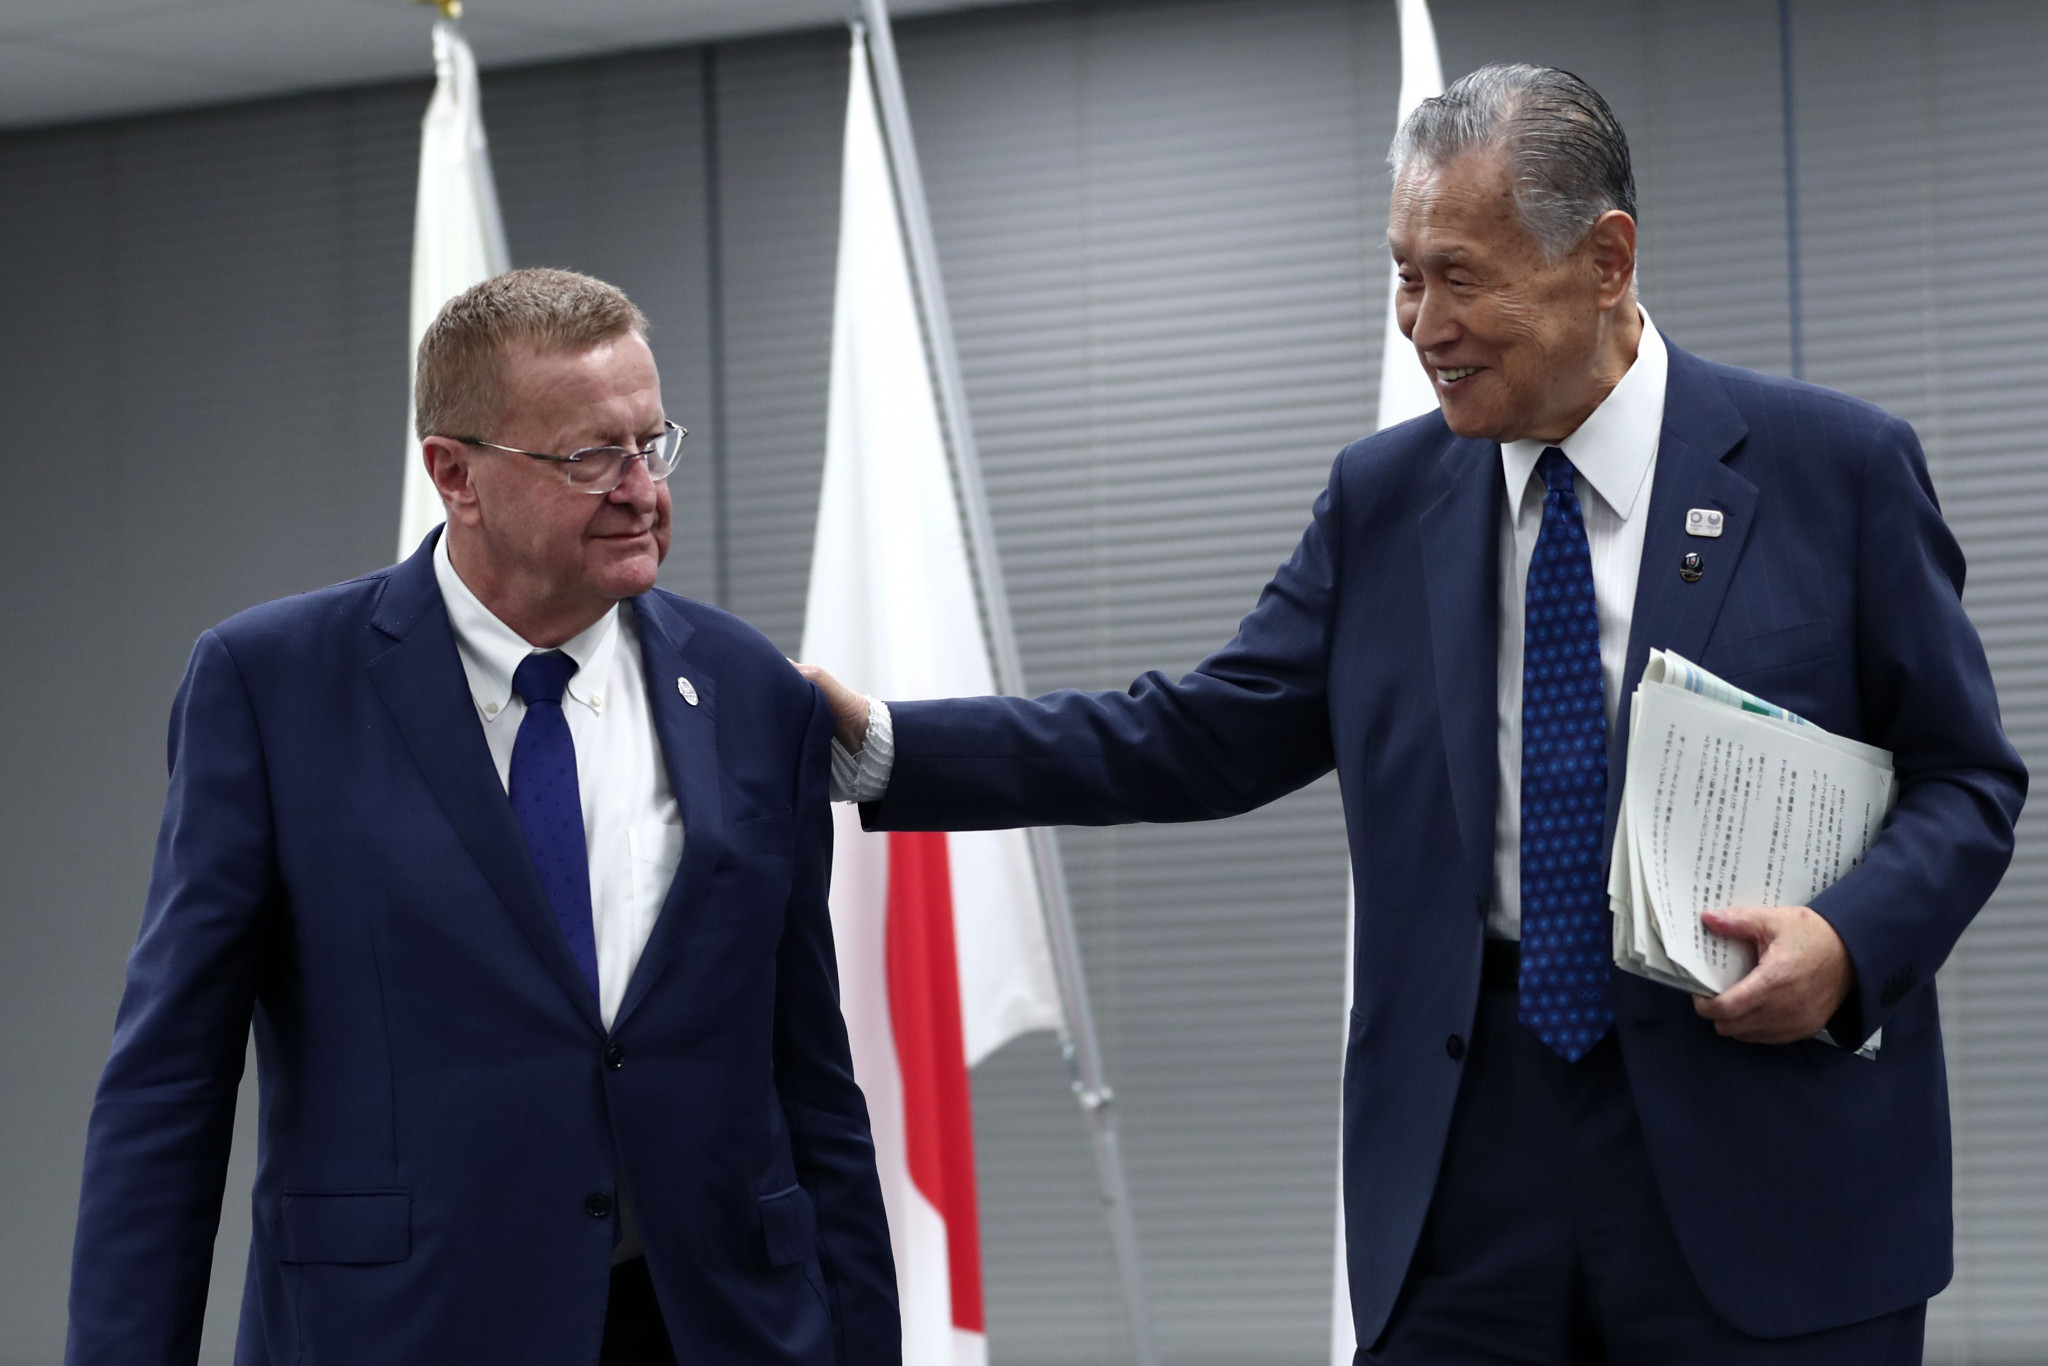 John Coates is confident that Tokyo 2020 will emerge successful following a vital test event period for next year's Olympic Games ©Getty Images